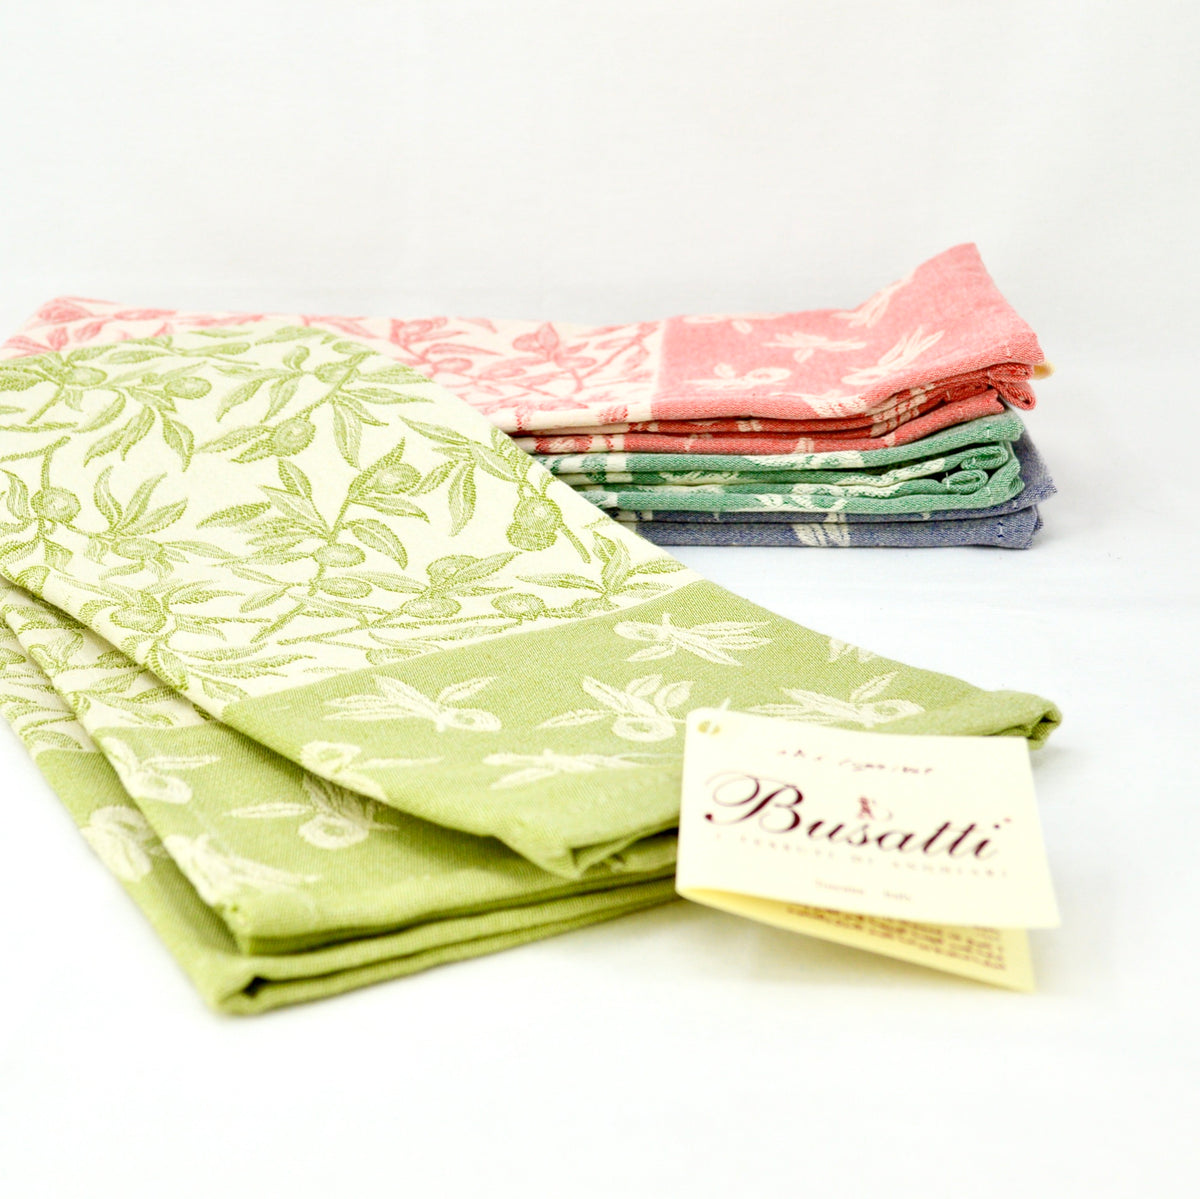 Busatti Oliva Kitchen Towel, Assorted Colors, Made in Italy - My Italian Decor